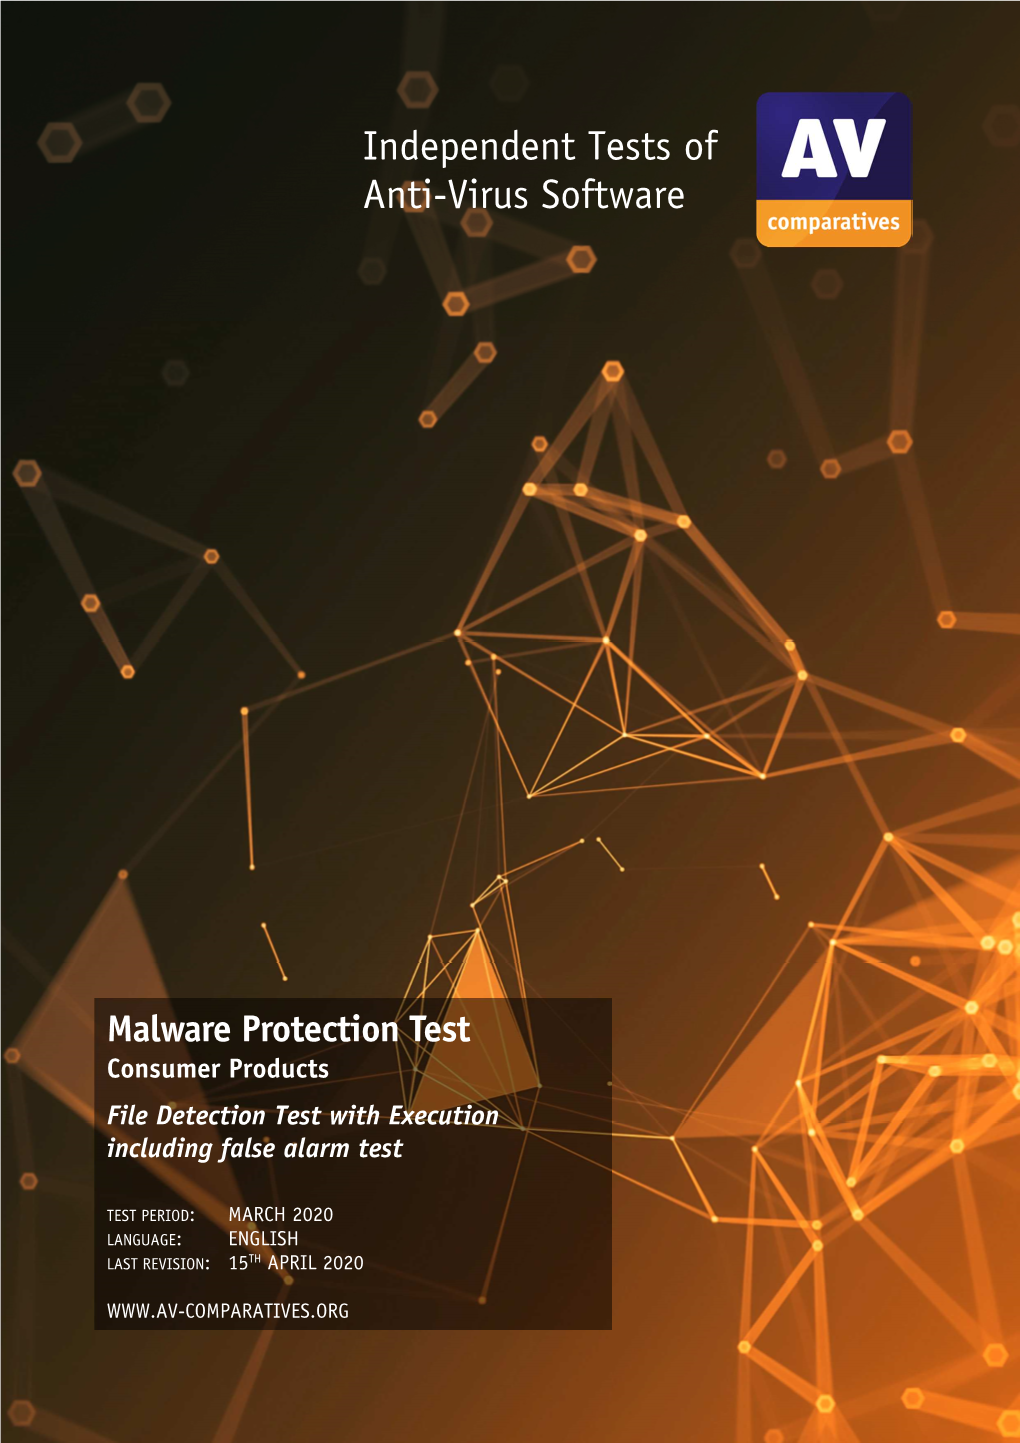 Consumer Malware Protection Test March 2020